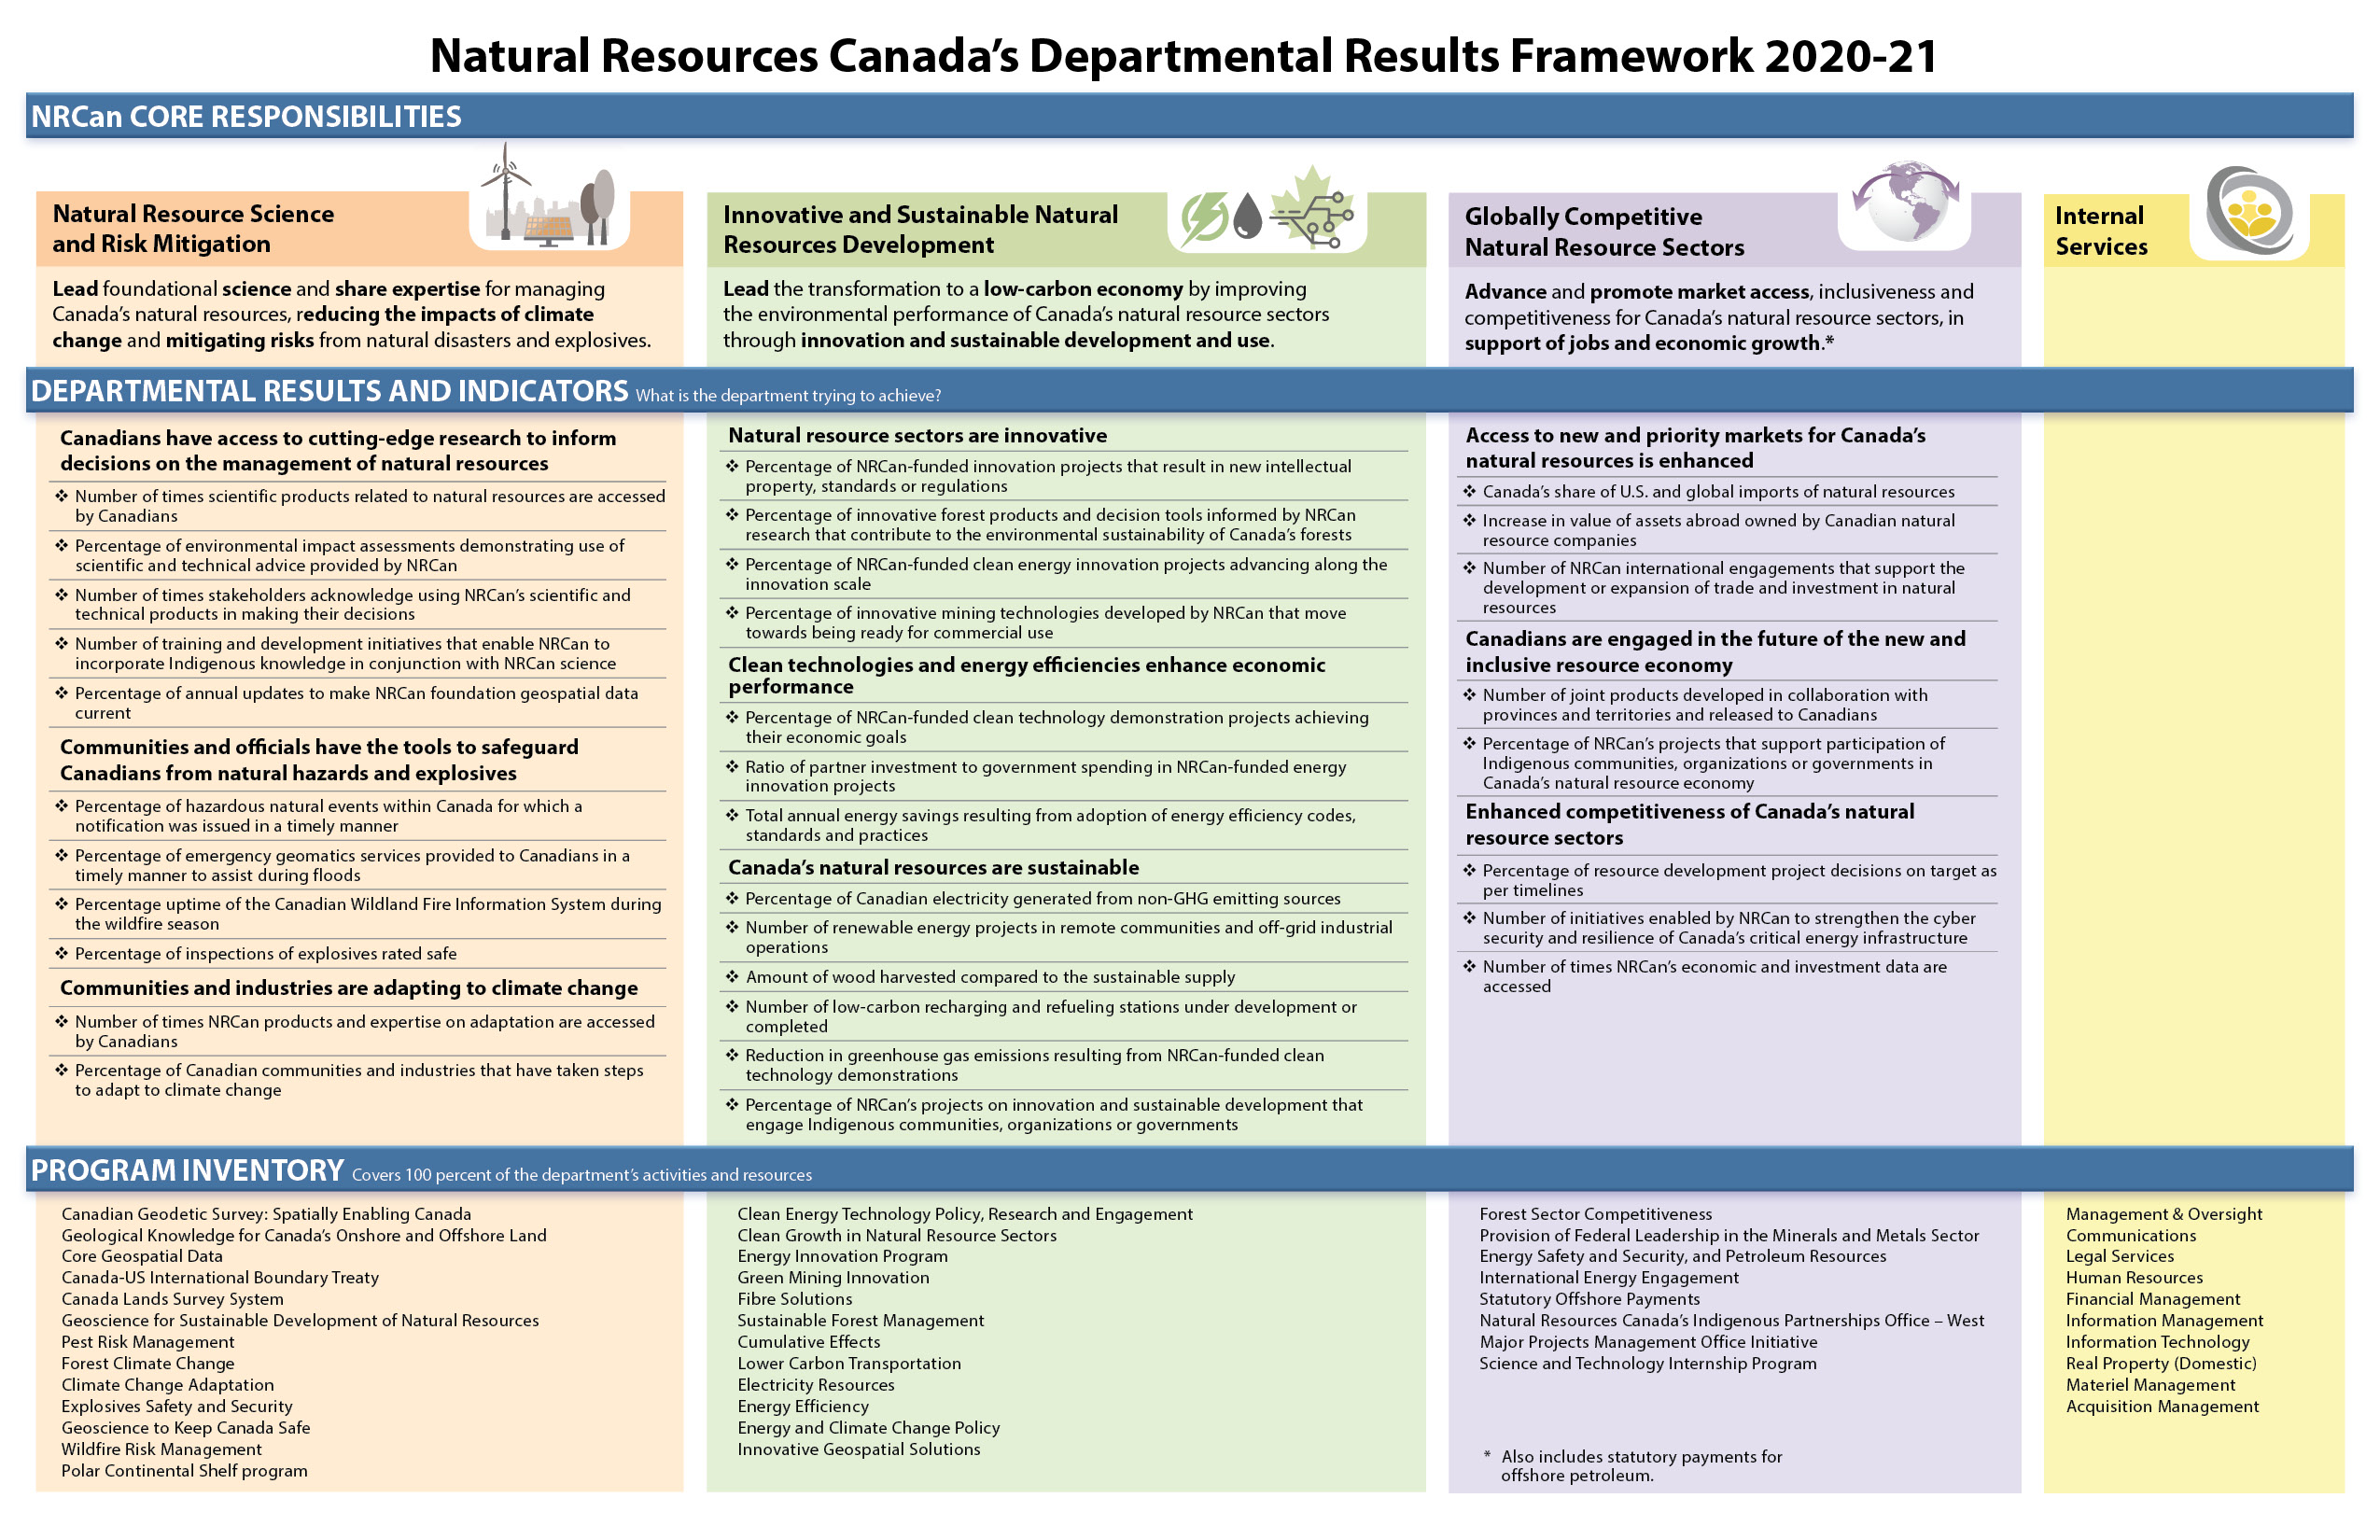 chart showing Natural Resources Canada's Department Results Framework 2020-21